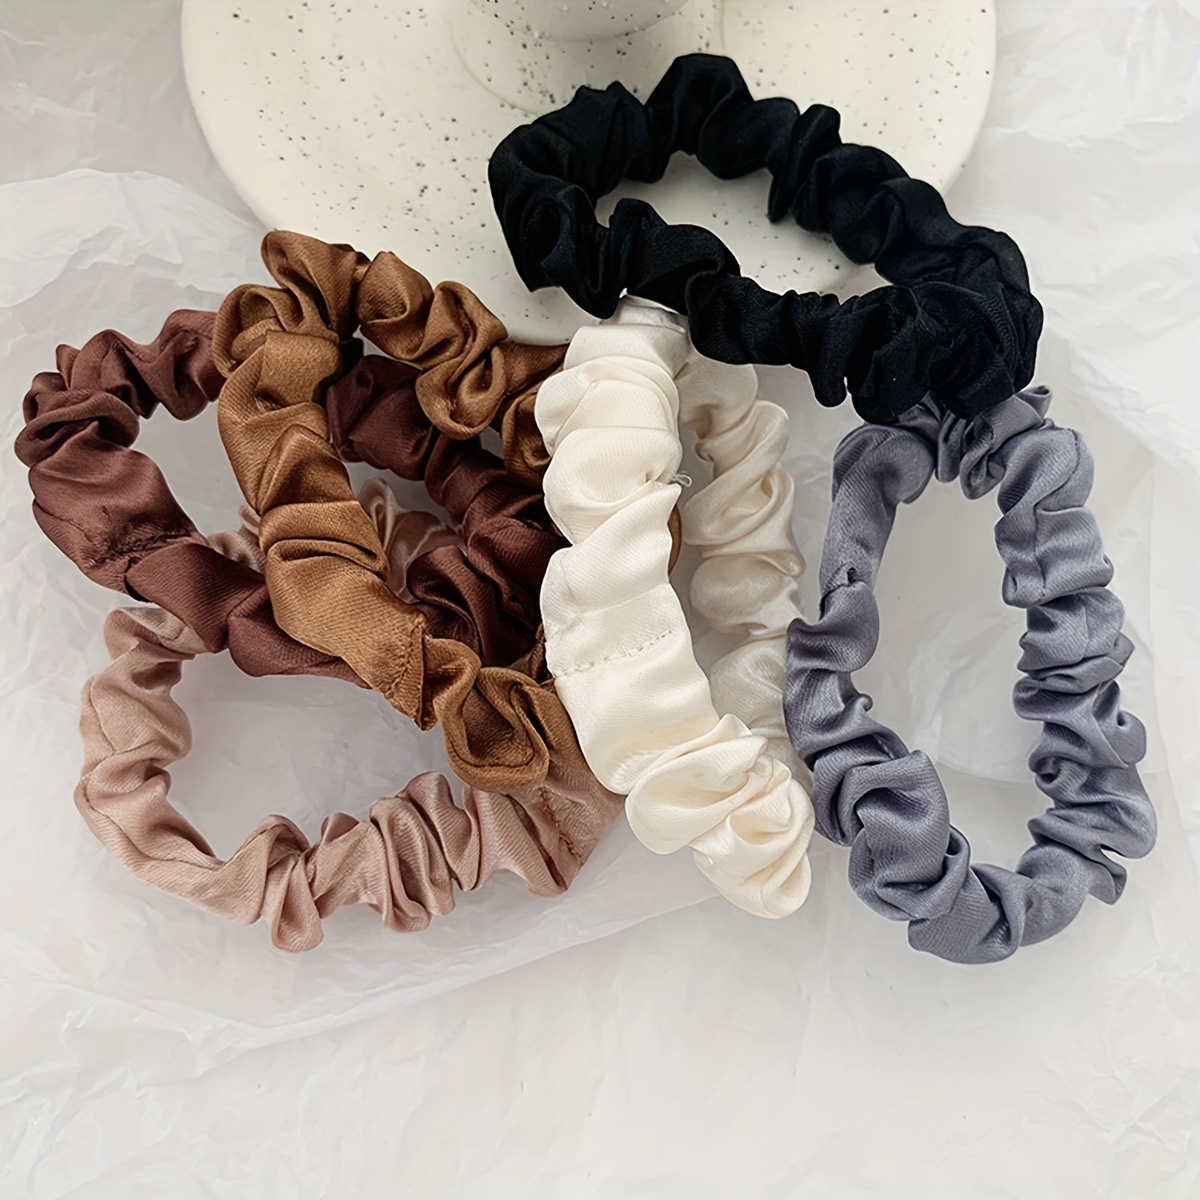 9pcs Women's Hair Accessories Set, Earth-tone Fabric Scrunchies & Basic  Hair Ties, Suitable For Daily Wear